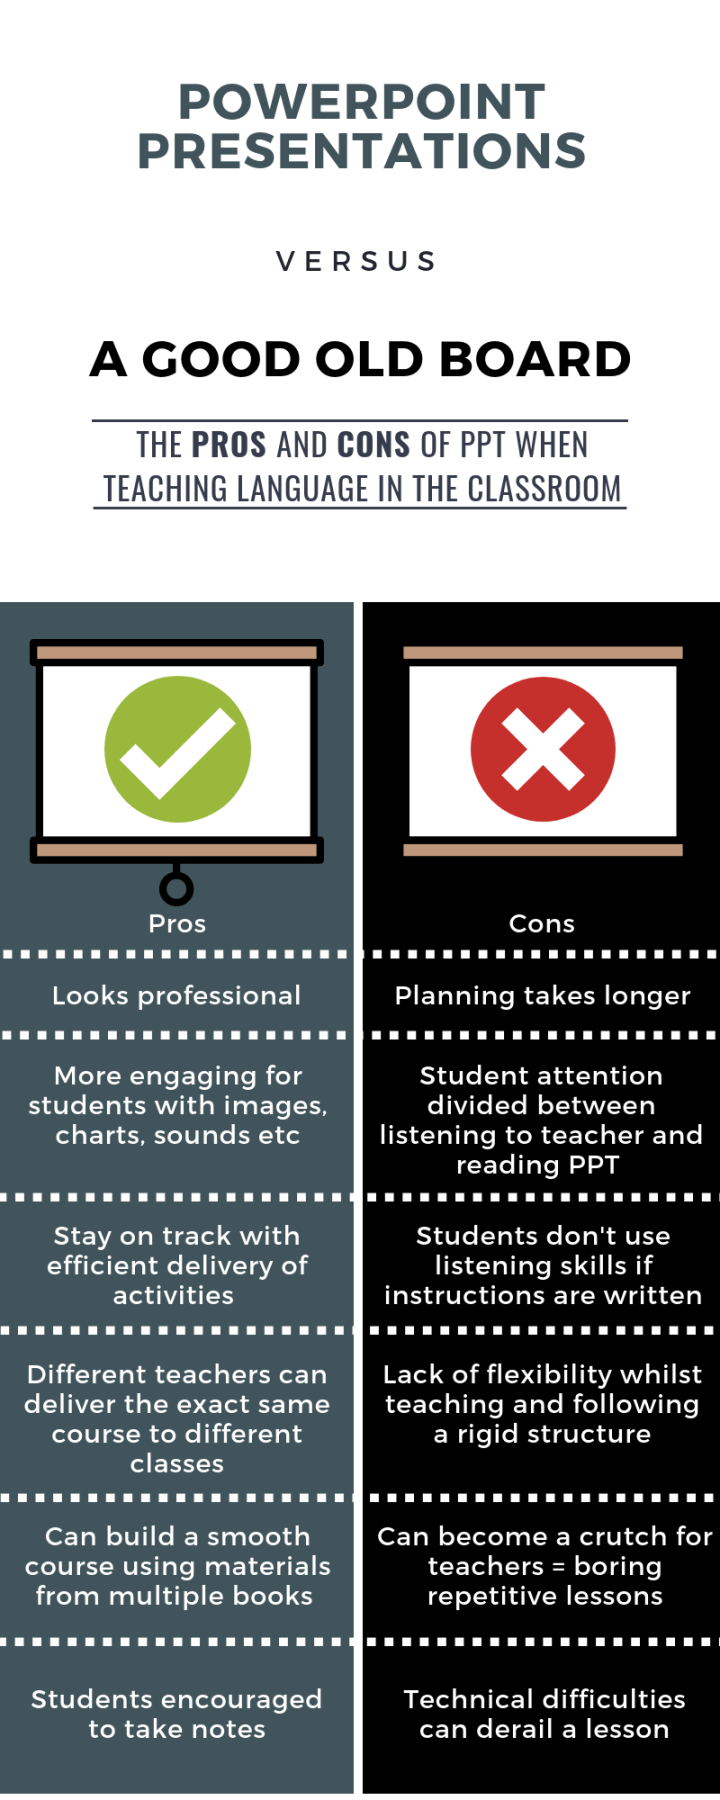 PPT pros and cons on the classroom